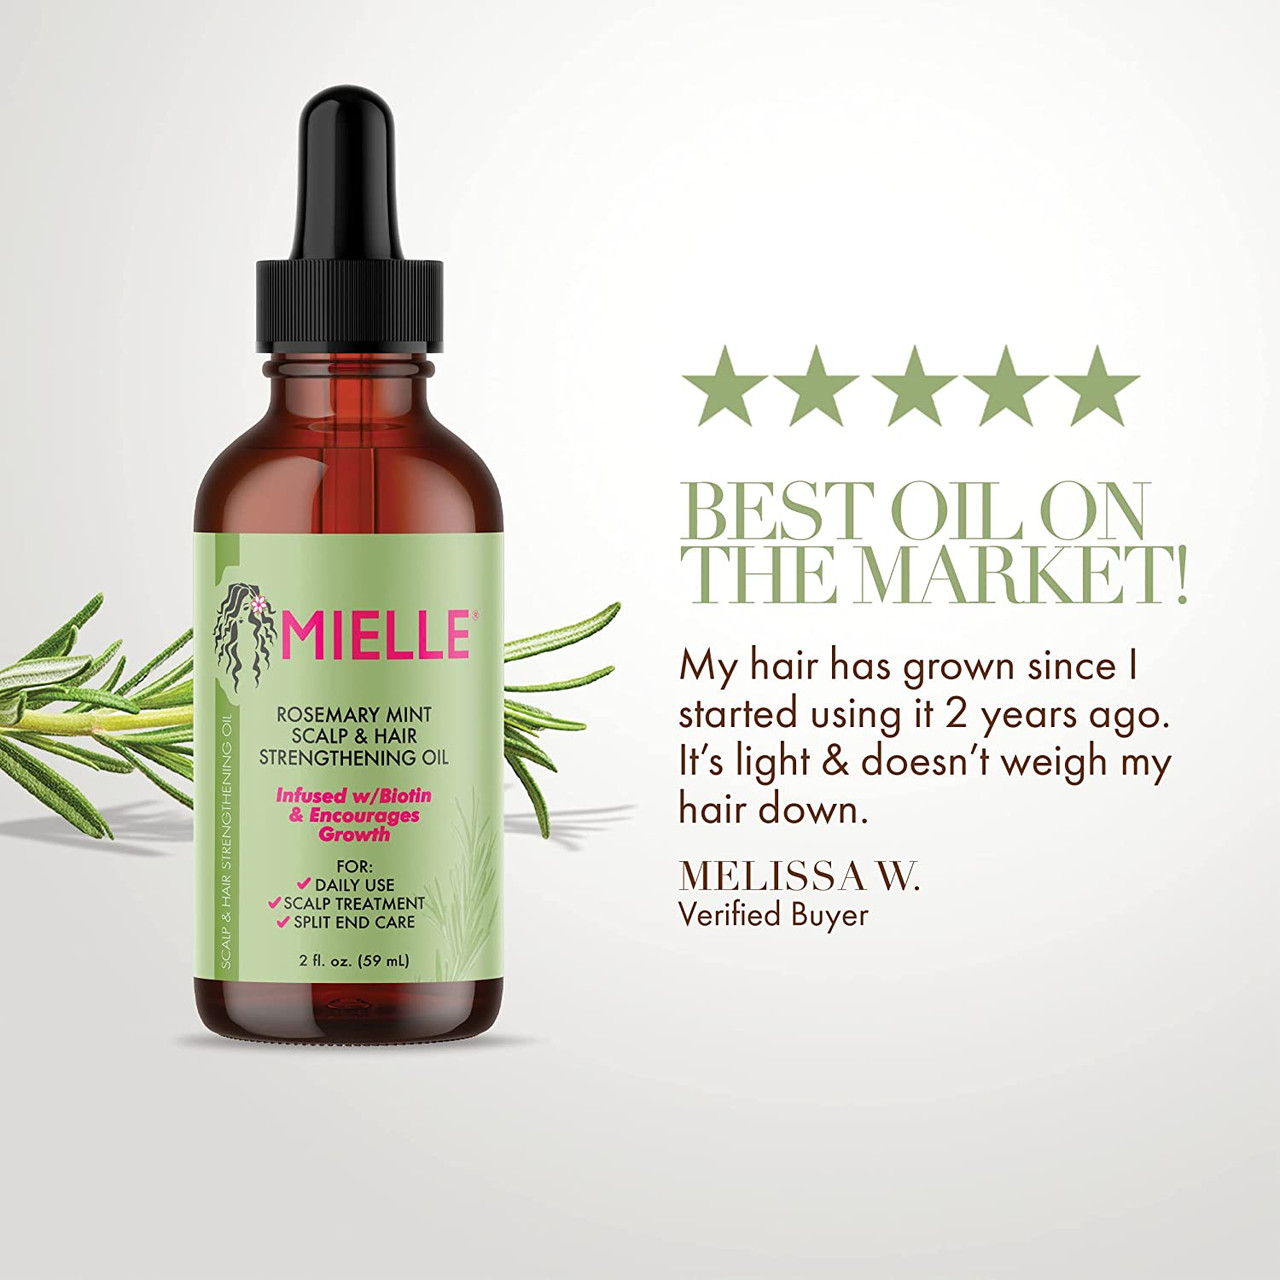 Mielle Organics Rosemary Mint Scalp And Hair Strengthening Oil 2 Oz Naturallycurly 7872